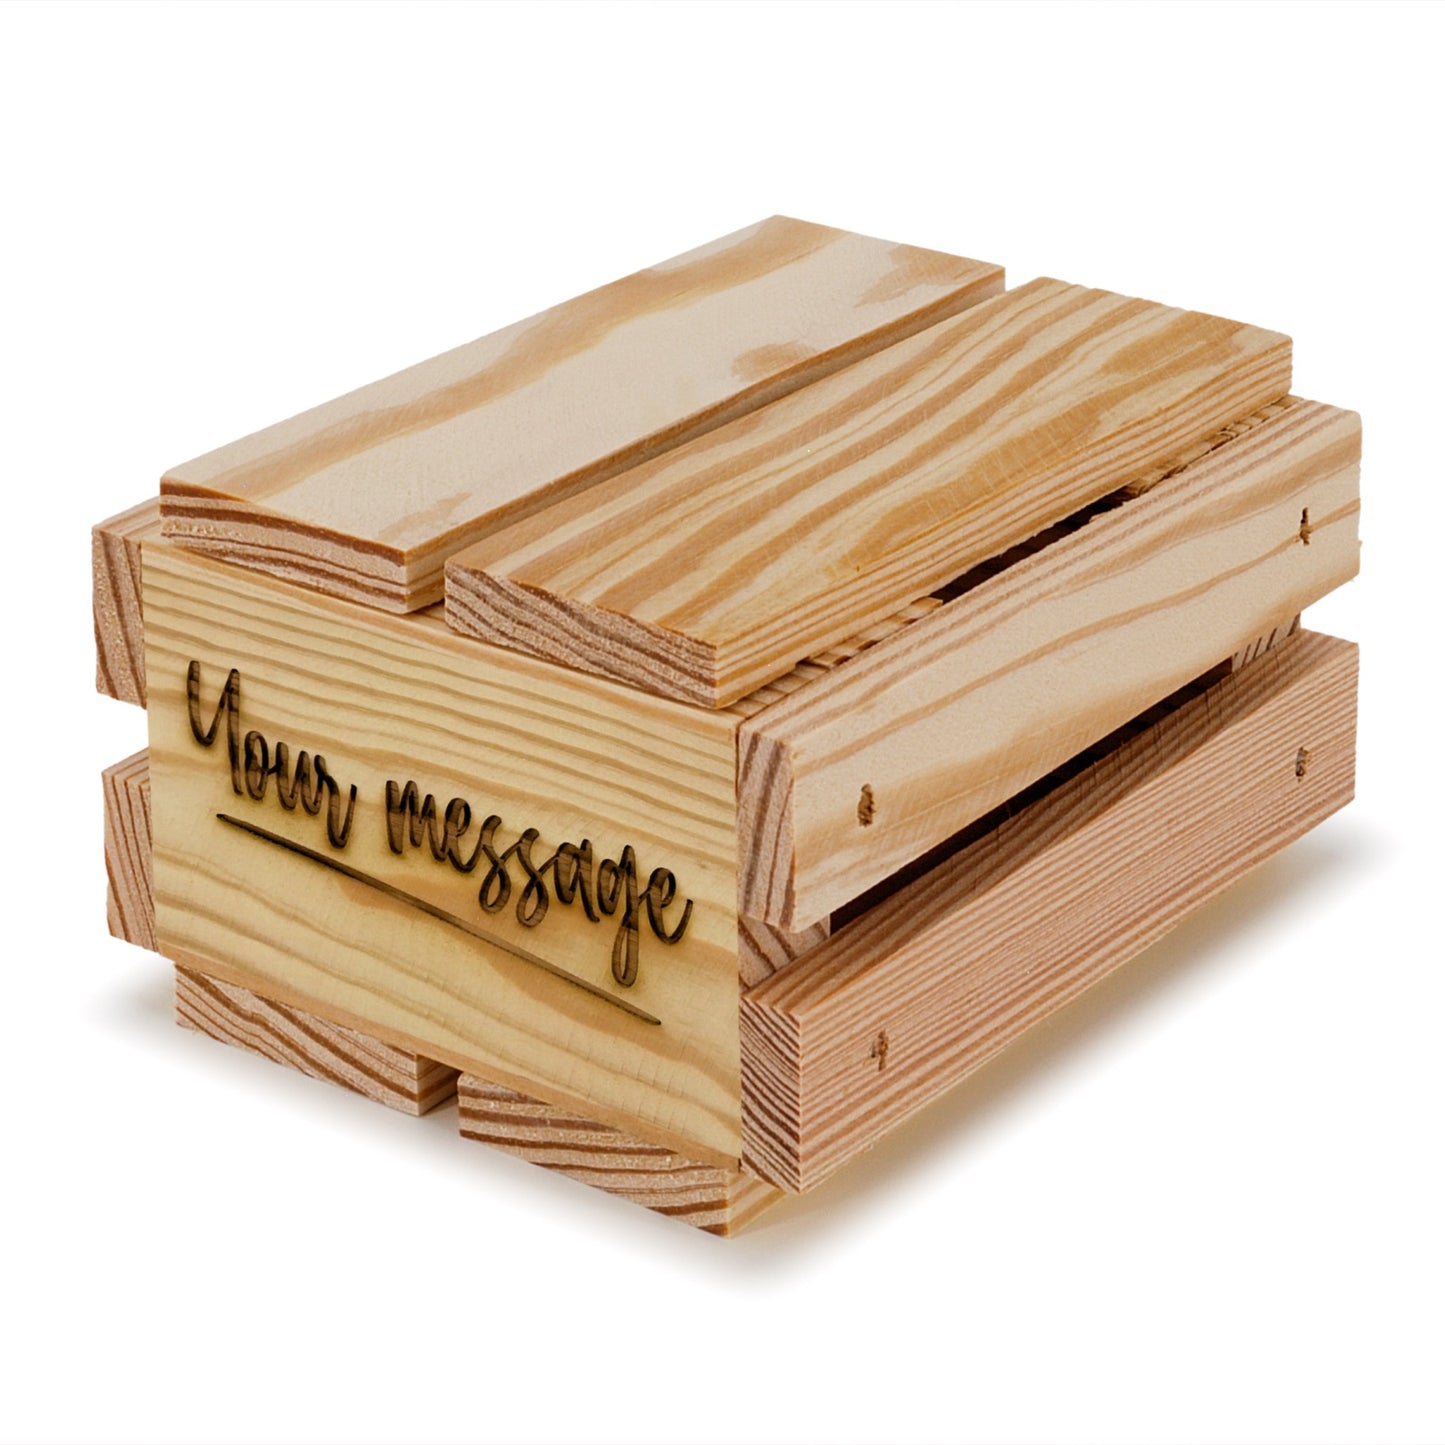 Small wooden crates with lid and your custom message 4x4x2.5, 6-SS-4-4-2.5-ST-NW-LL, 12-SS-4-4-2.5-ST-NW-LL, 24-SS-4-4-2.5-ST-NW-LL, 48-SS-4-4-2.5-ST-NW-LL, 96-SS-4-4-2.5-ST-NW-LL